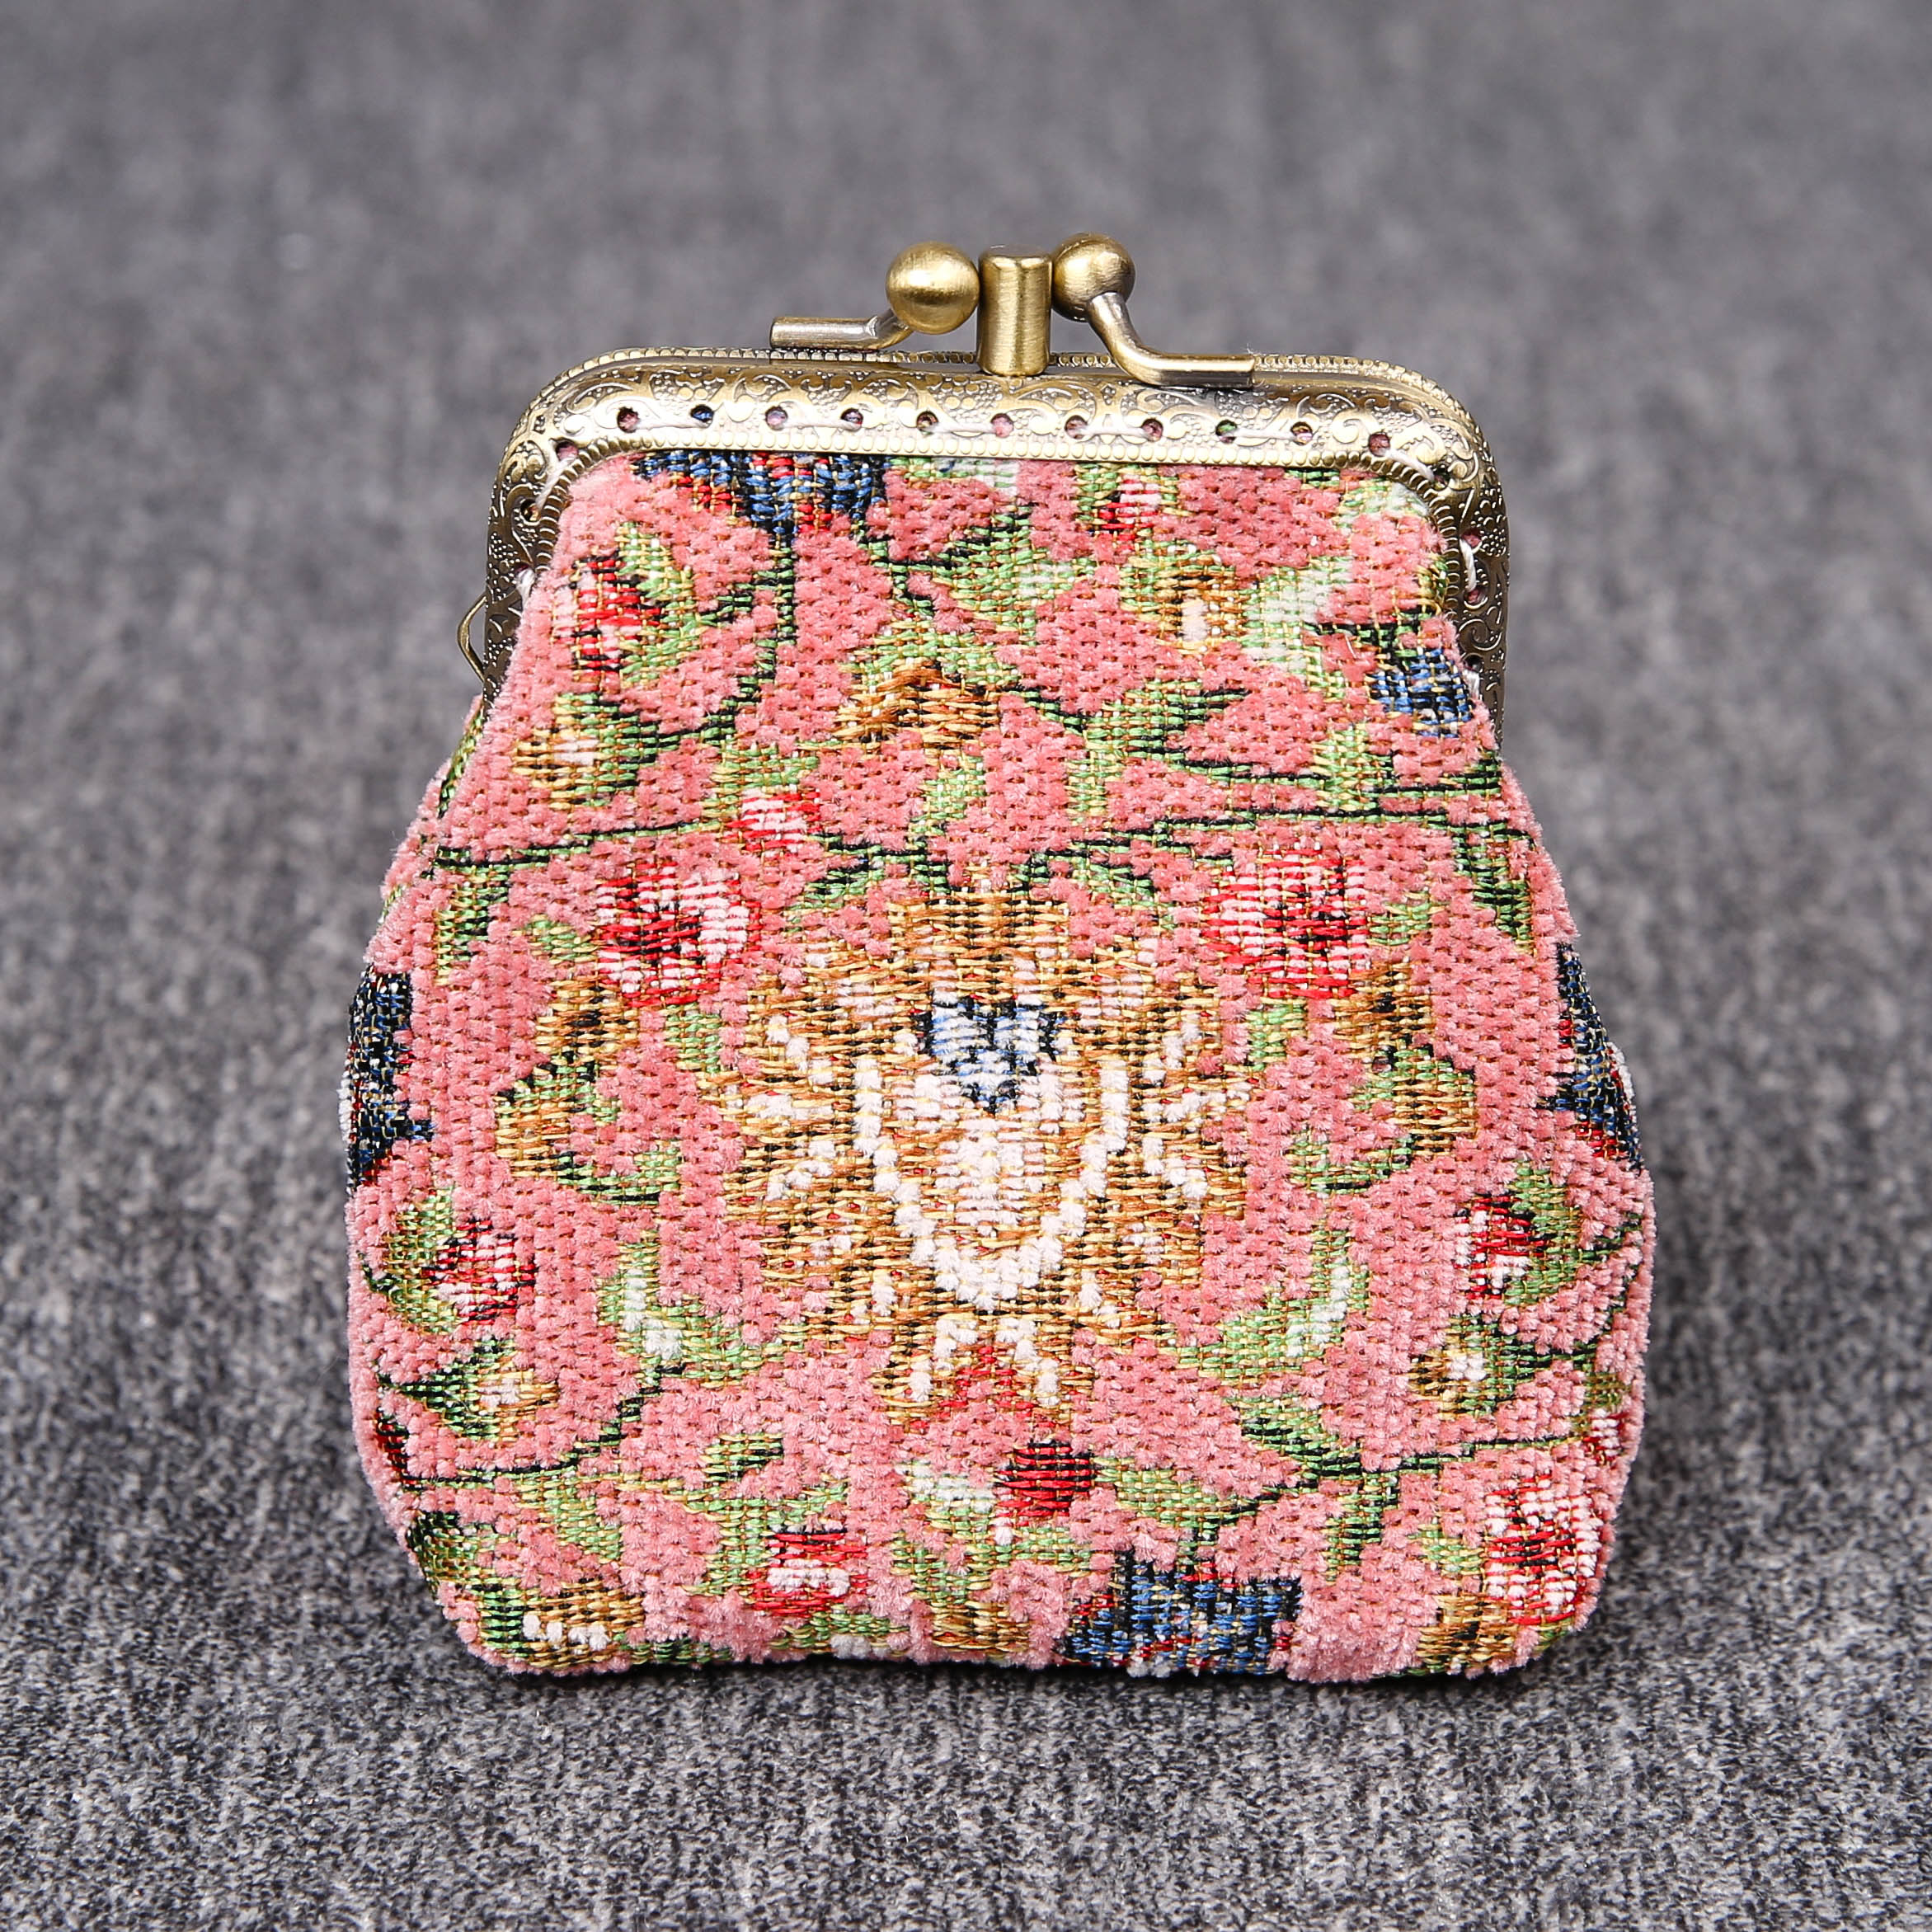 Small Change Purse Real Leather Lovely Female Coin Bag Double Zipper New Coin  Purse Pink Mini Foreign Trade Change Bag Coin Purse Wallet From Flower_bud,  $13.57 | DHgate.Com